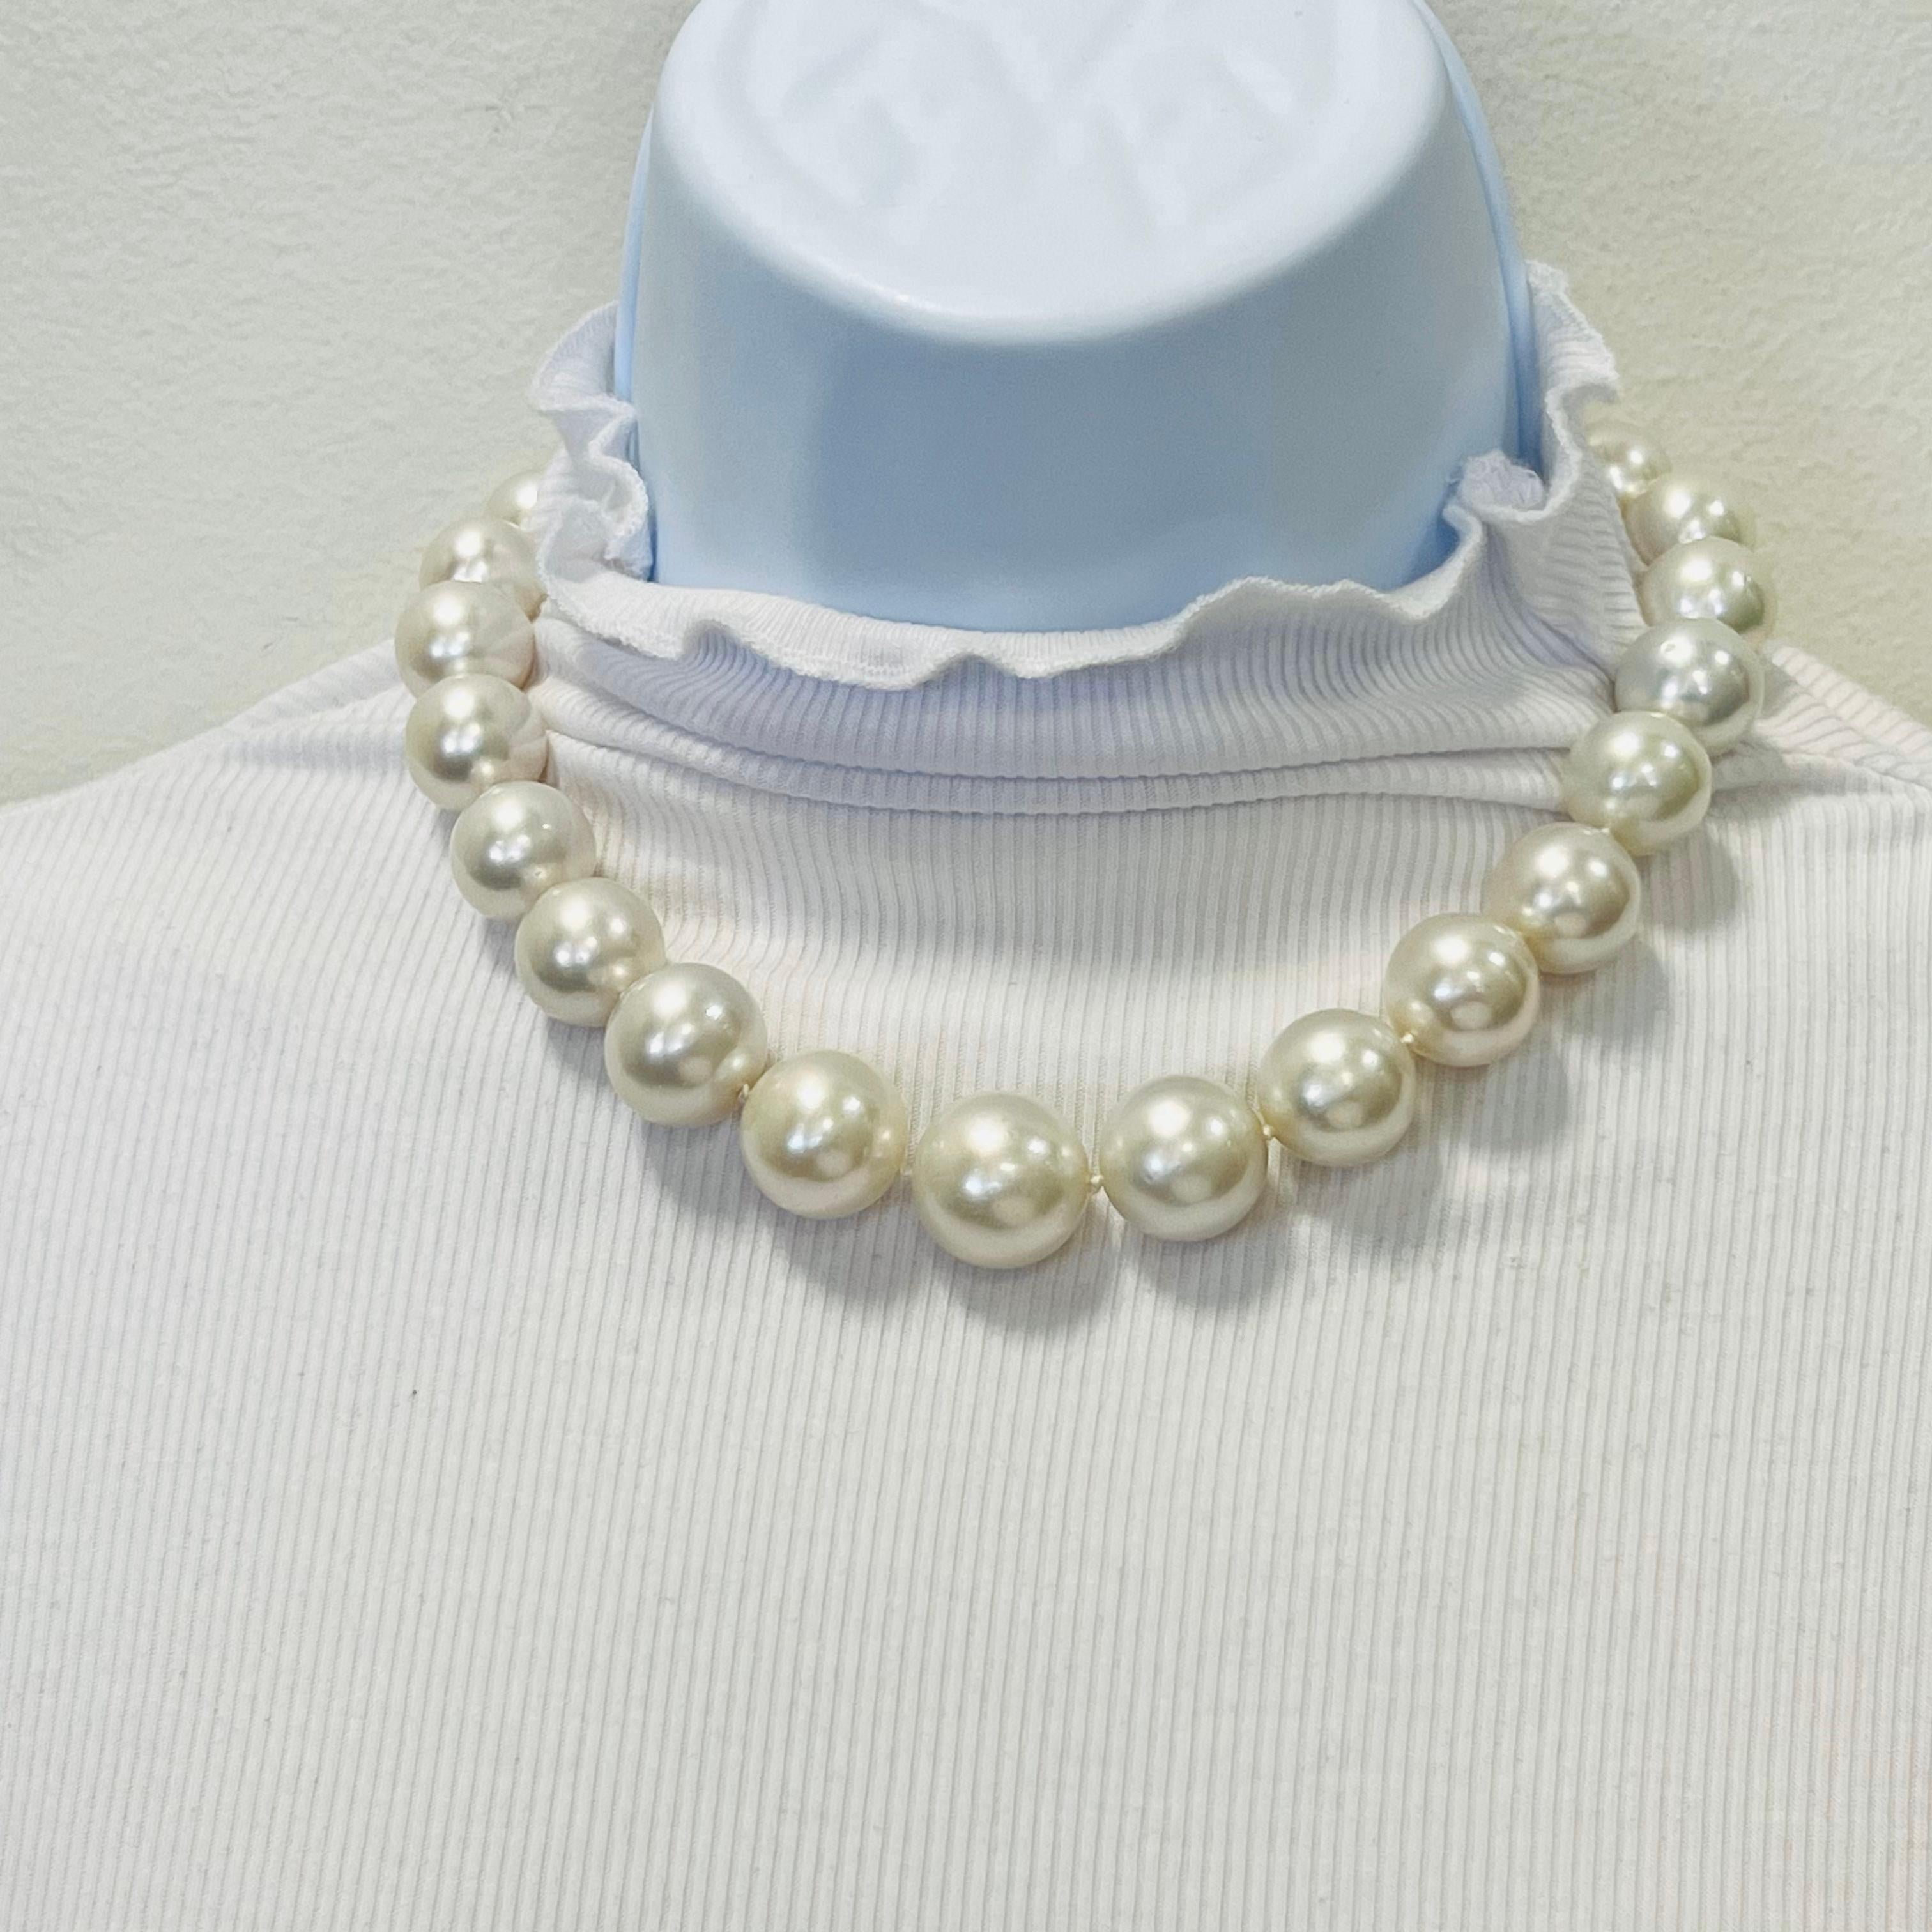 Gorgeous white round South Sea pearls (total of 25) with a ball clasp with 1.75 ct. good quality white diamond pave.  Handmade in 18k white gold clasp and hand strung beautifully.  Length 15.5